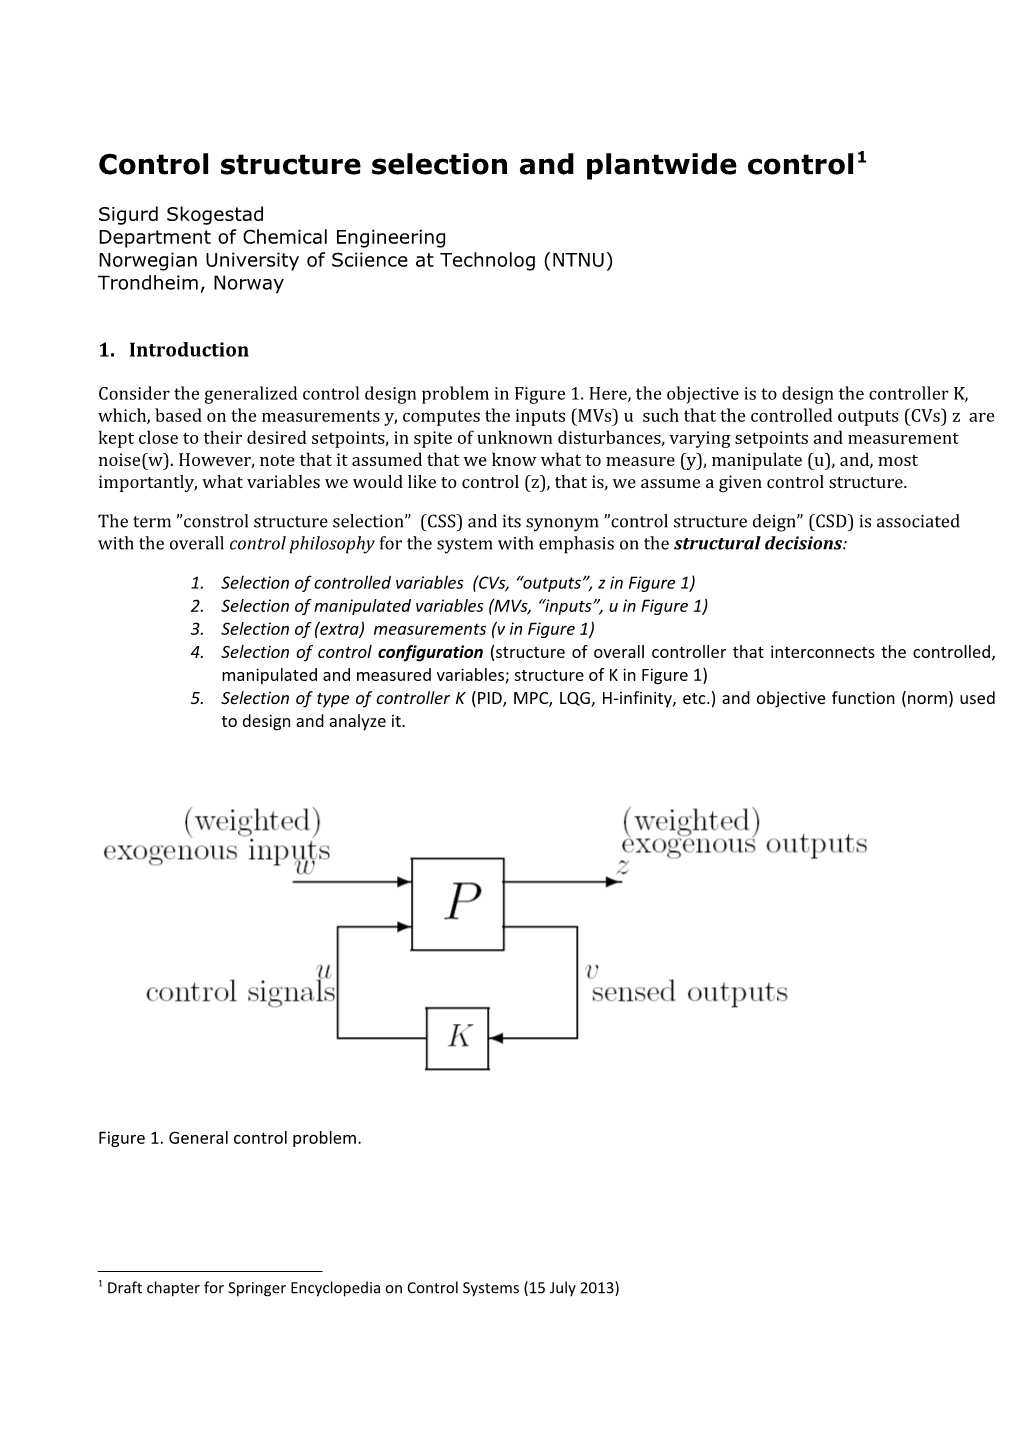 Ullman S Encylopedia of Process Systems Engineering (2010)